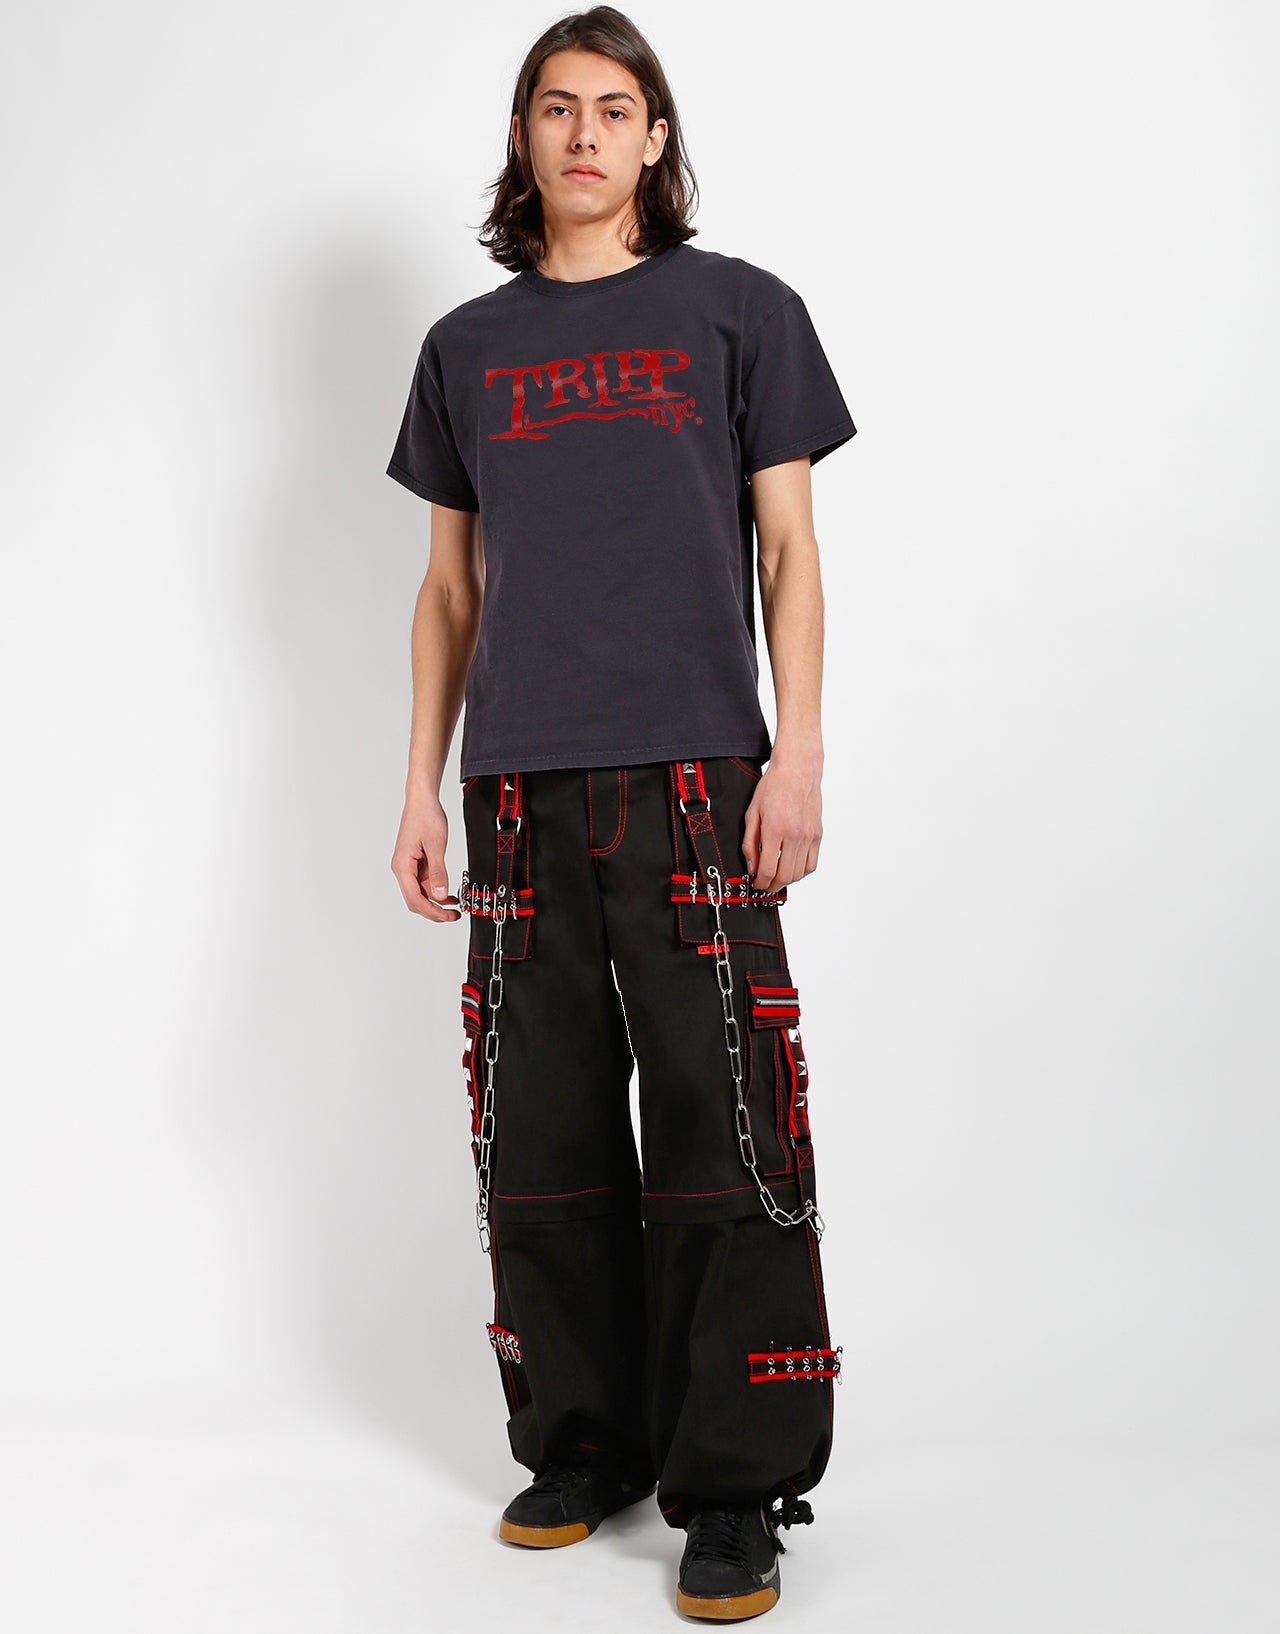 CRAZY PIPER PANT RED